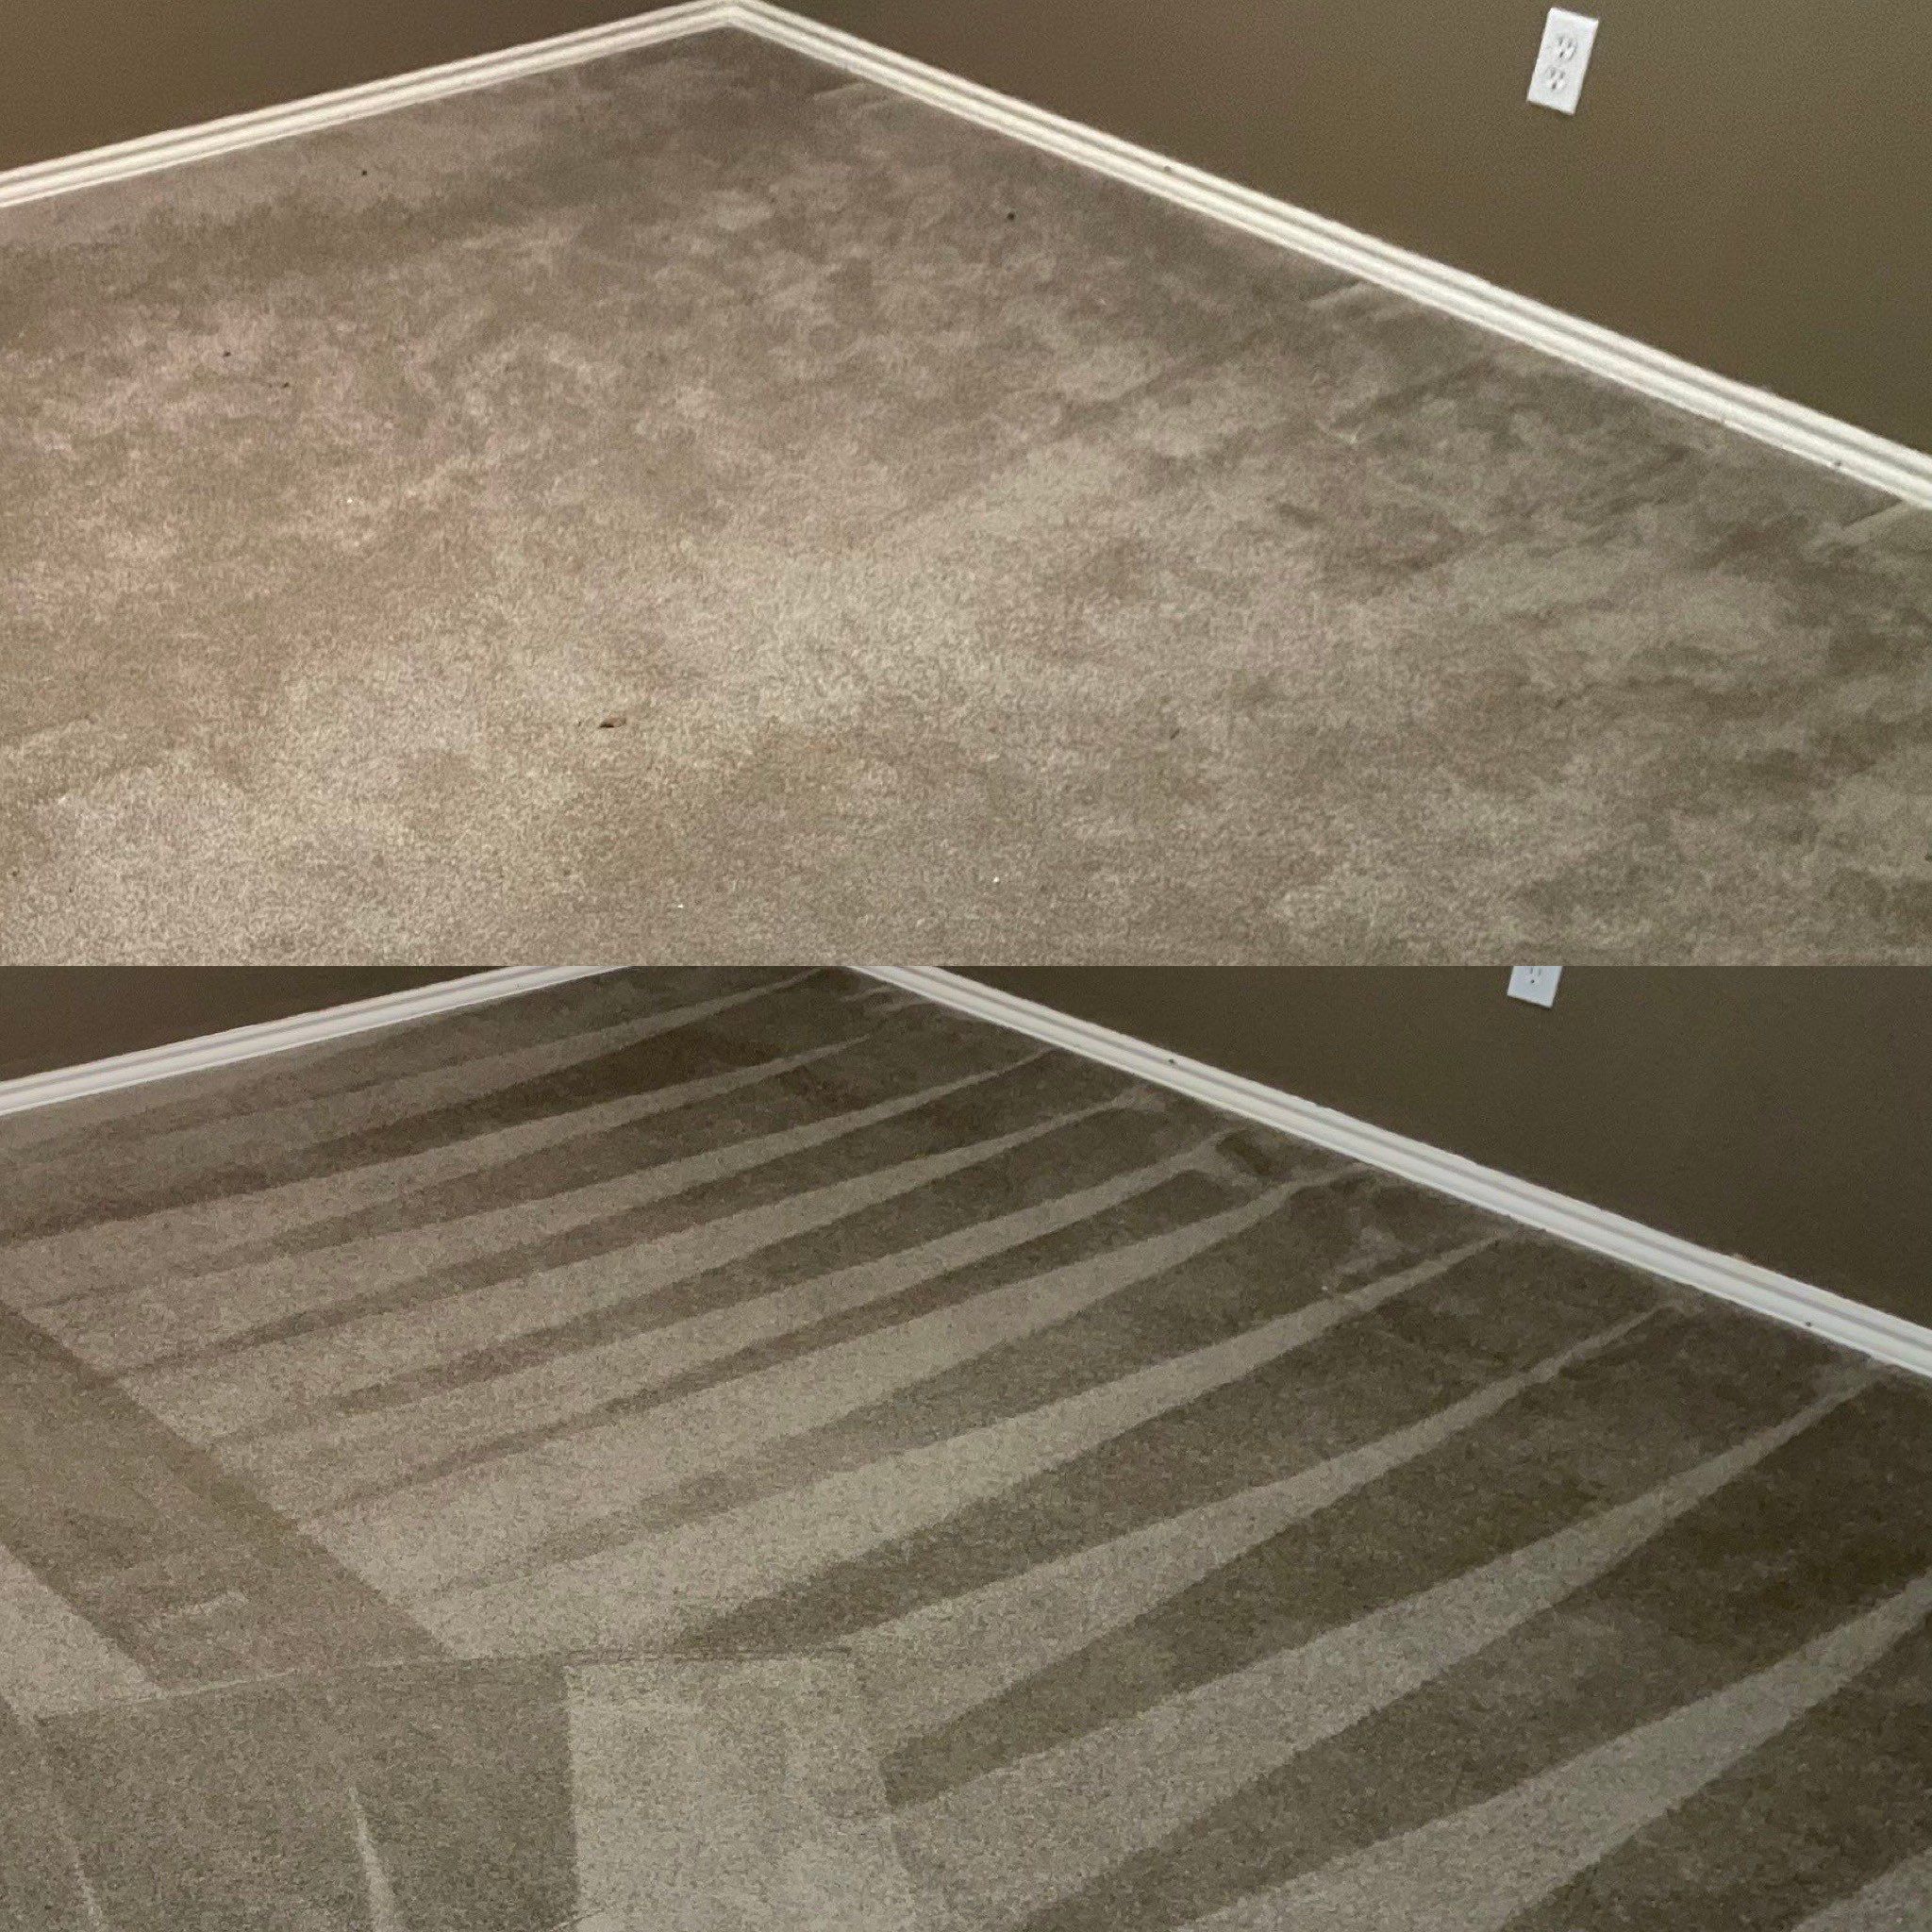 Carpet Cleaning Steam Cleaning Project in San Antonio TX 78258